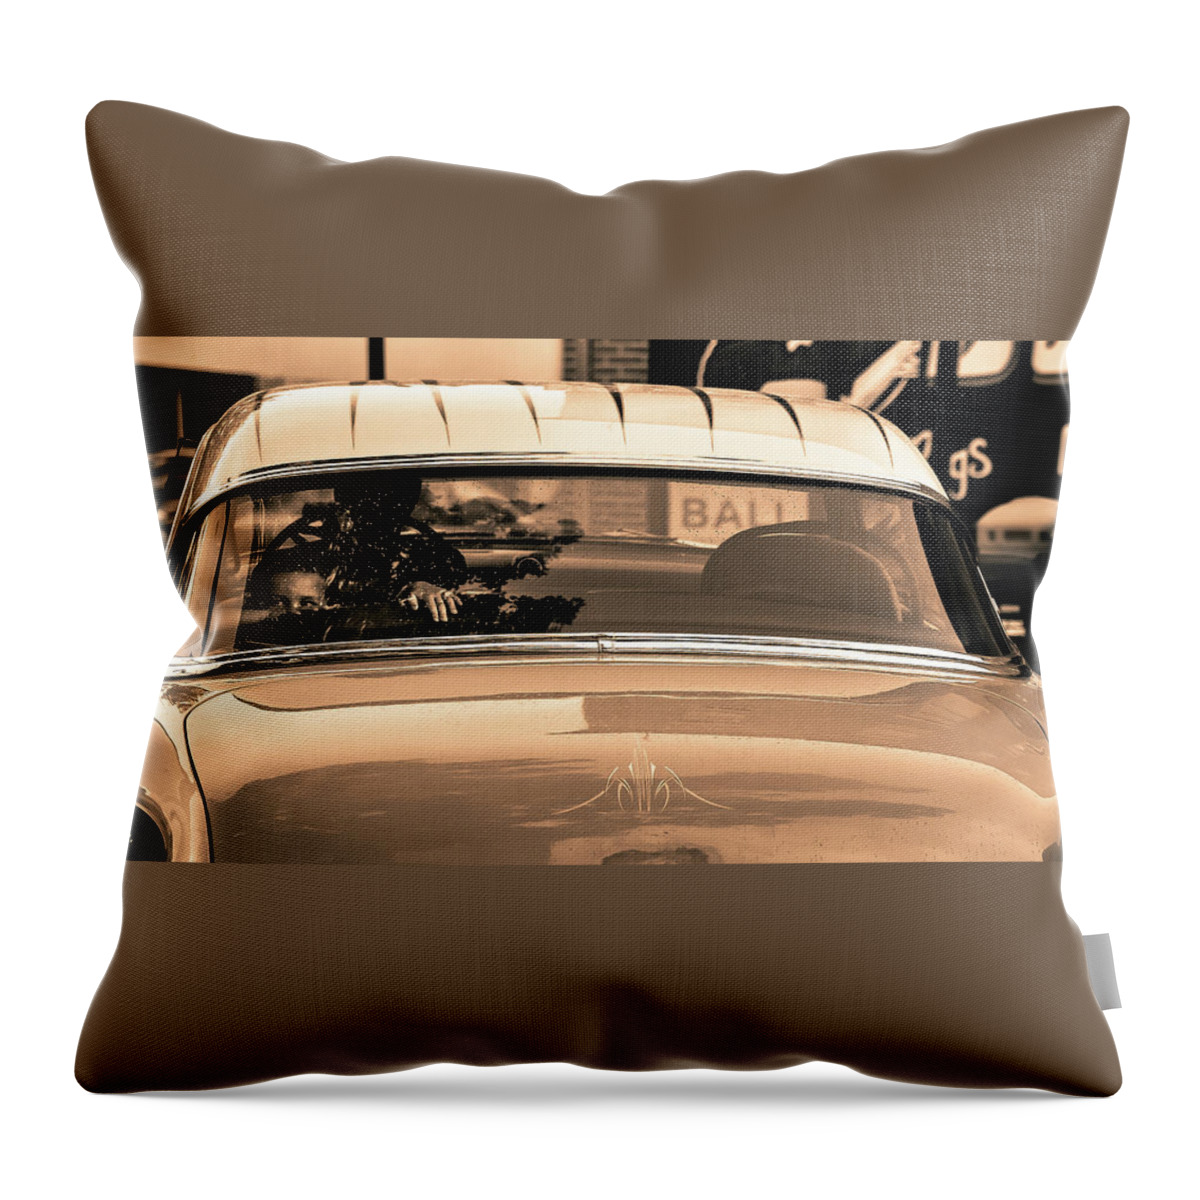 Belair- Of Cars-classic Cars- Boy In Back Window- Muscle Car Art- Images For Car Lovers- Photography Of Are Ann M. Garrett - Chevy- Throw Pillow featuring the photograph Only You   version 2 by Rae Ann M Garrett